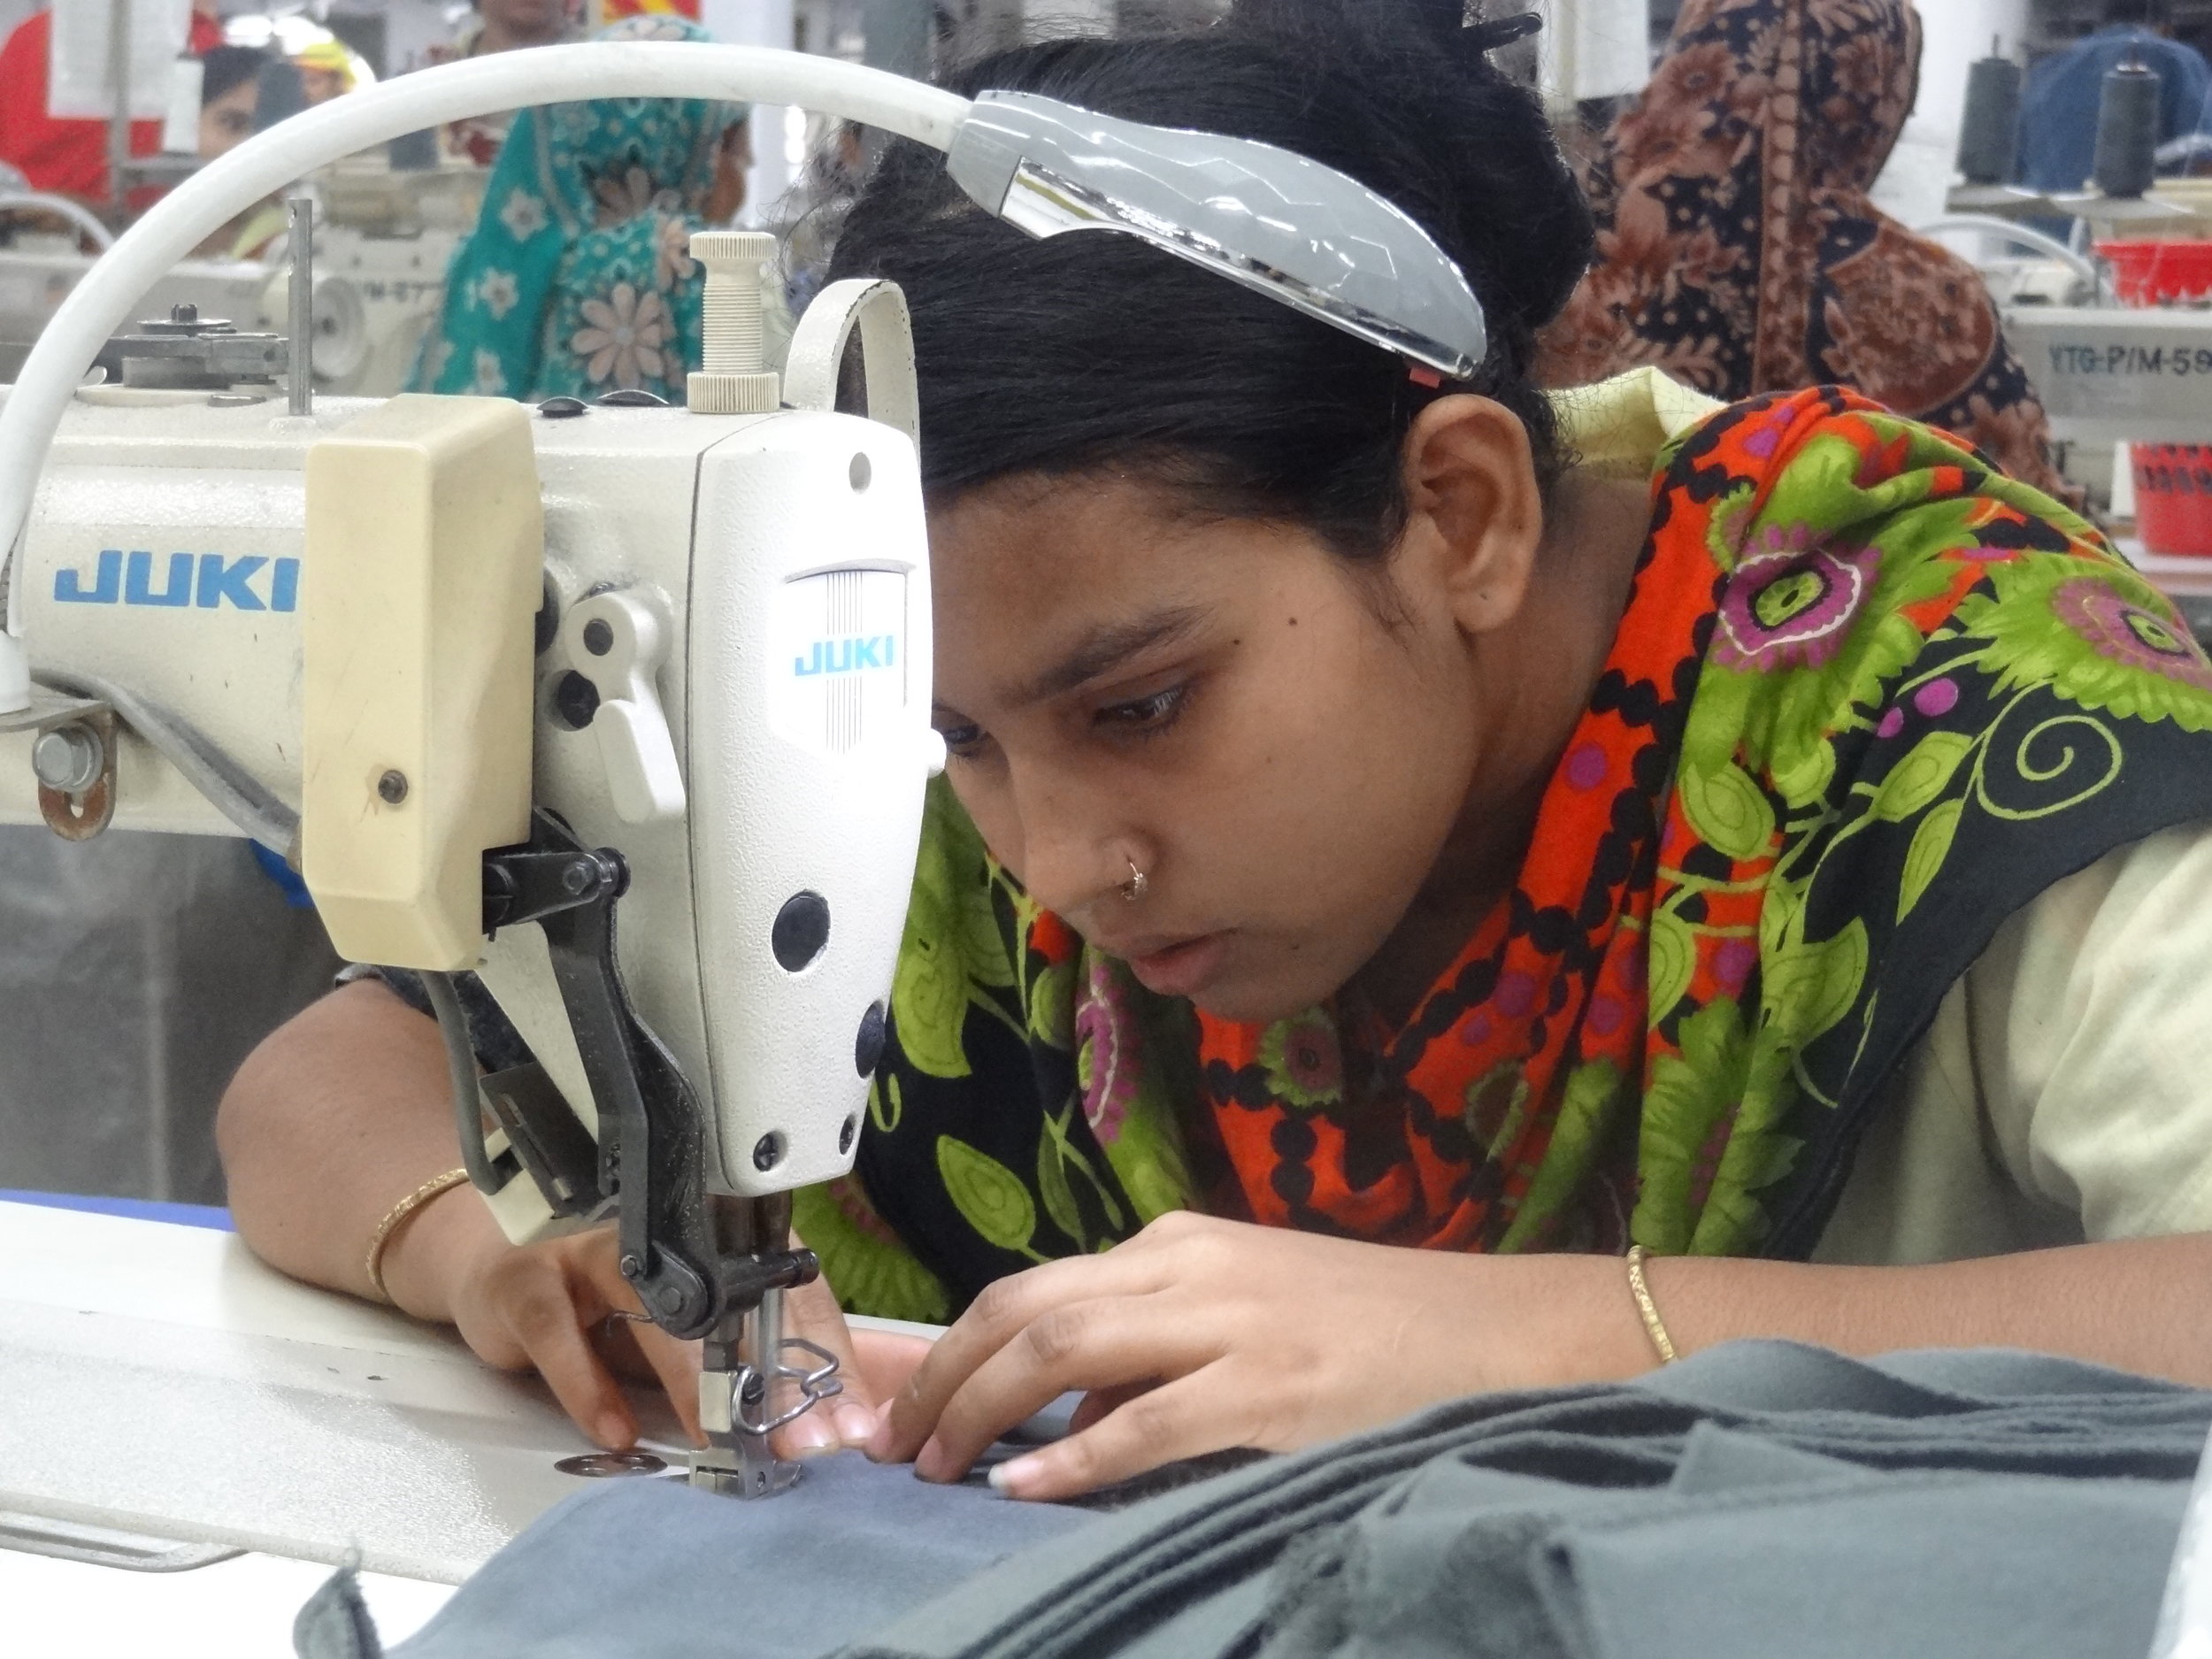 Beyond Bangladesh: The need for responsible purchasing practices in supply chains is a global issue